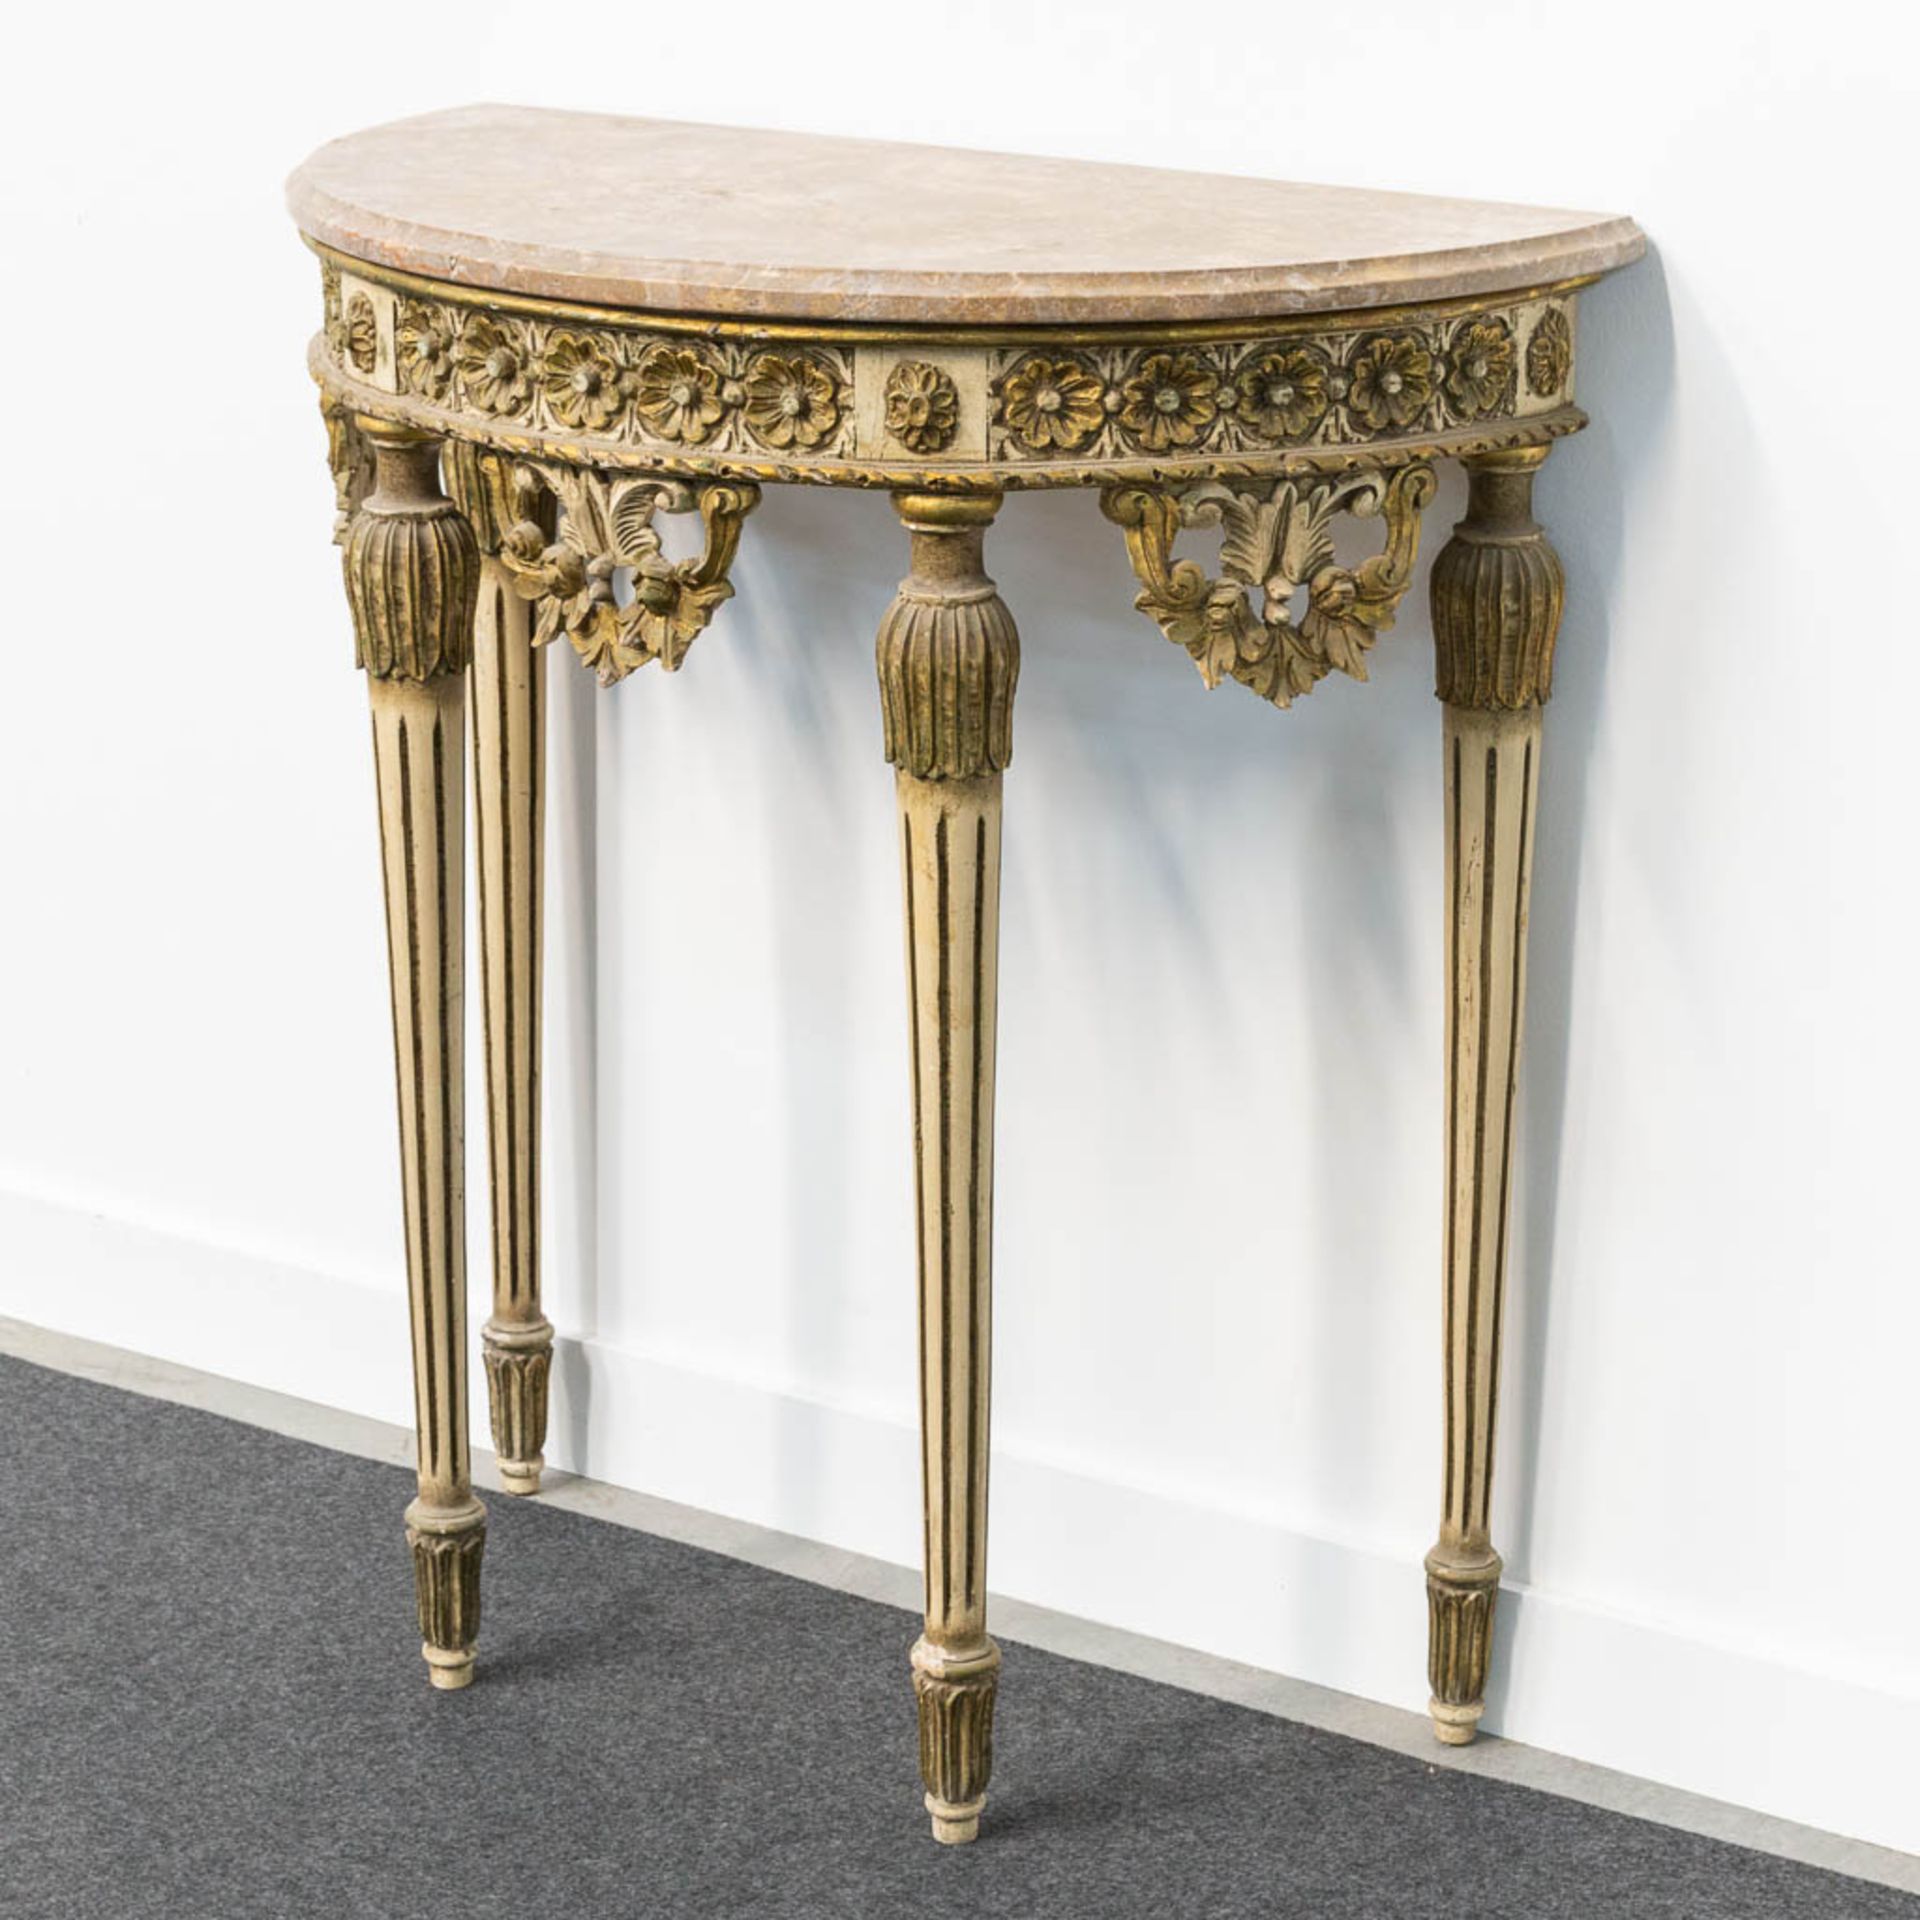 A Louis XVI style console table with marble top and sculptured wood decorations. - Image 4 of 12